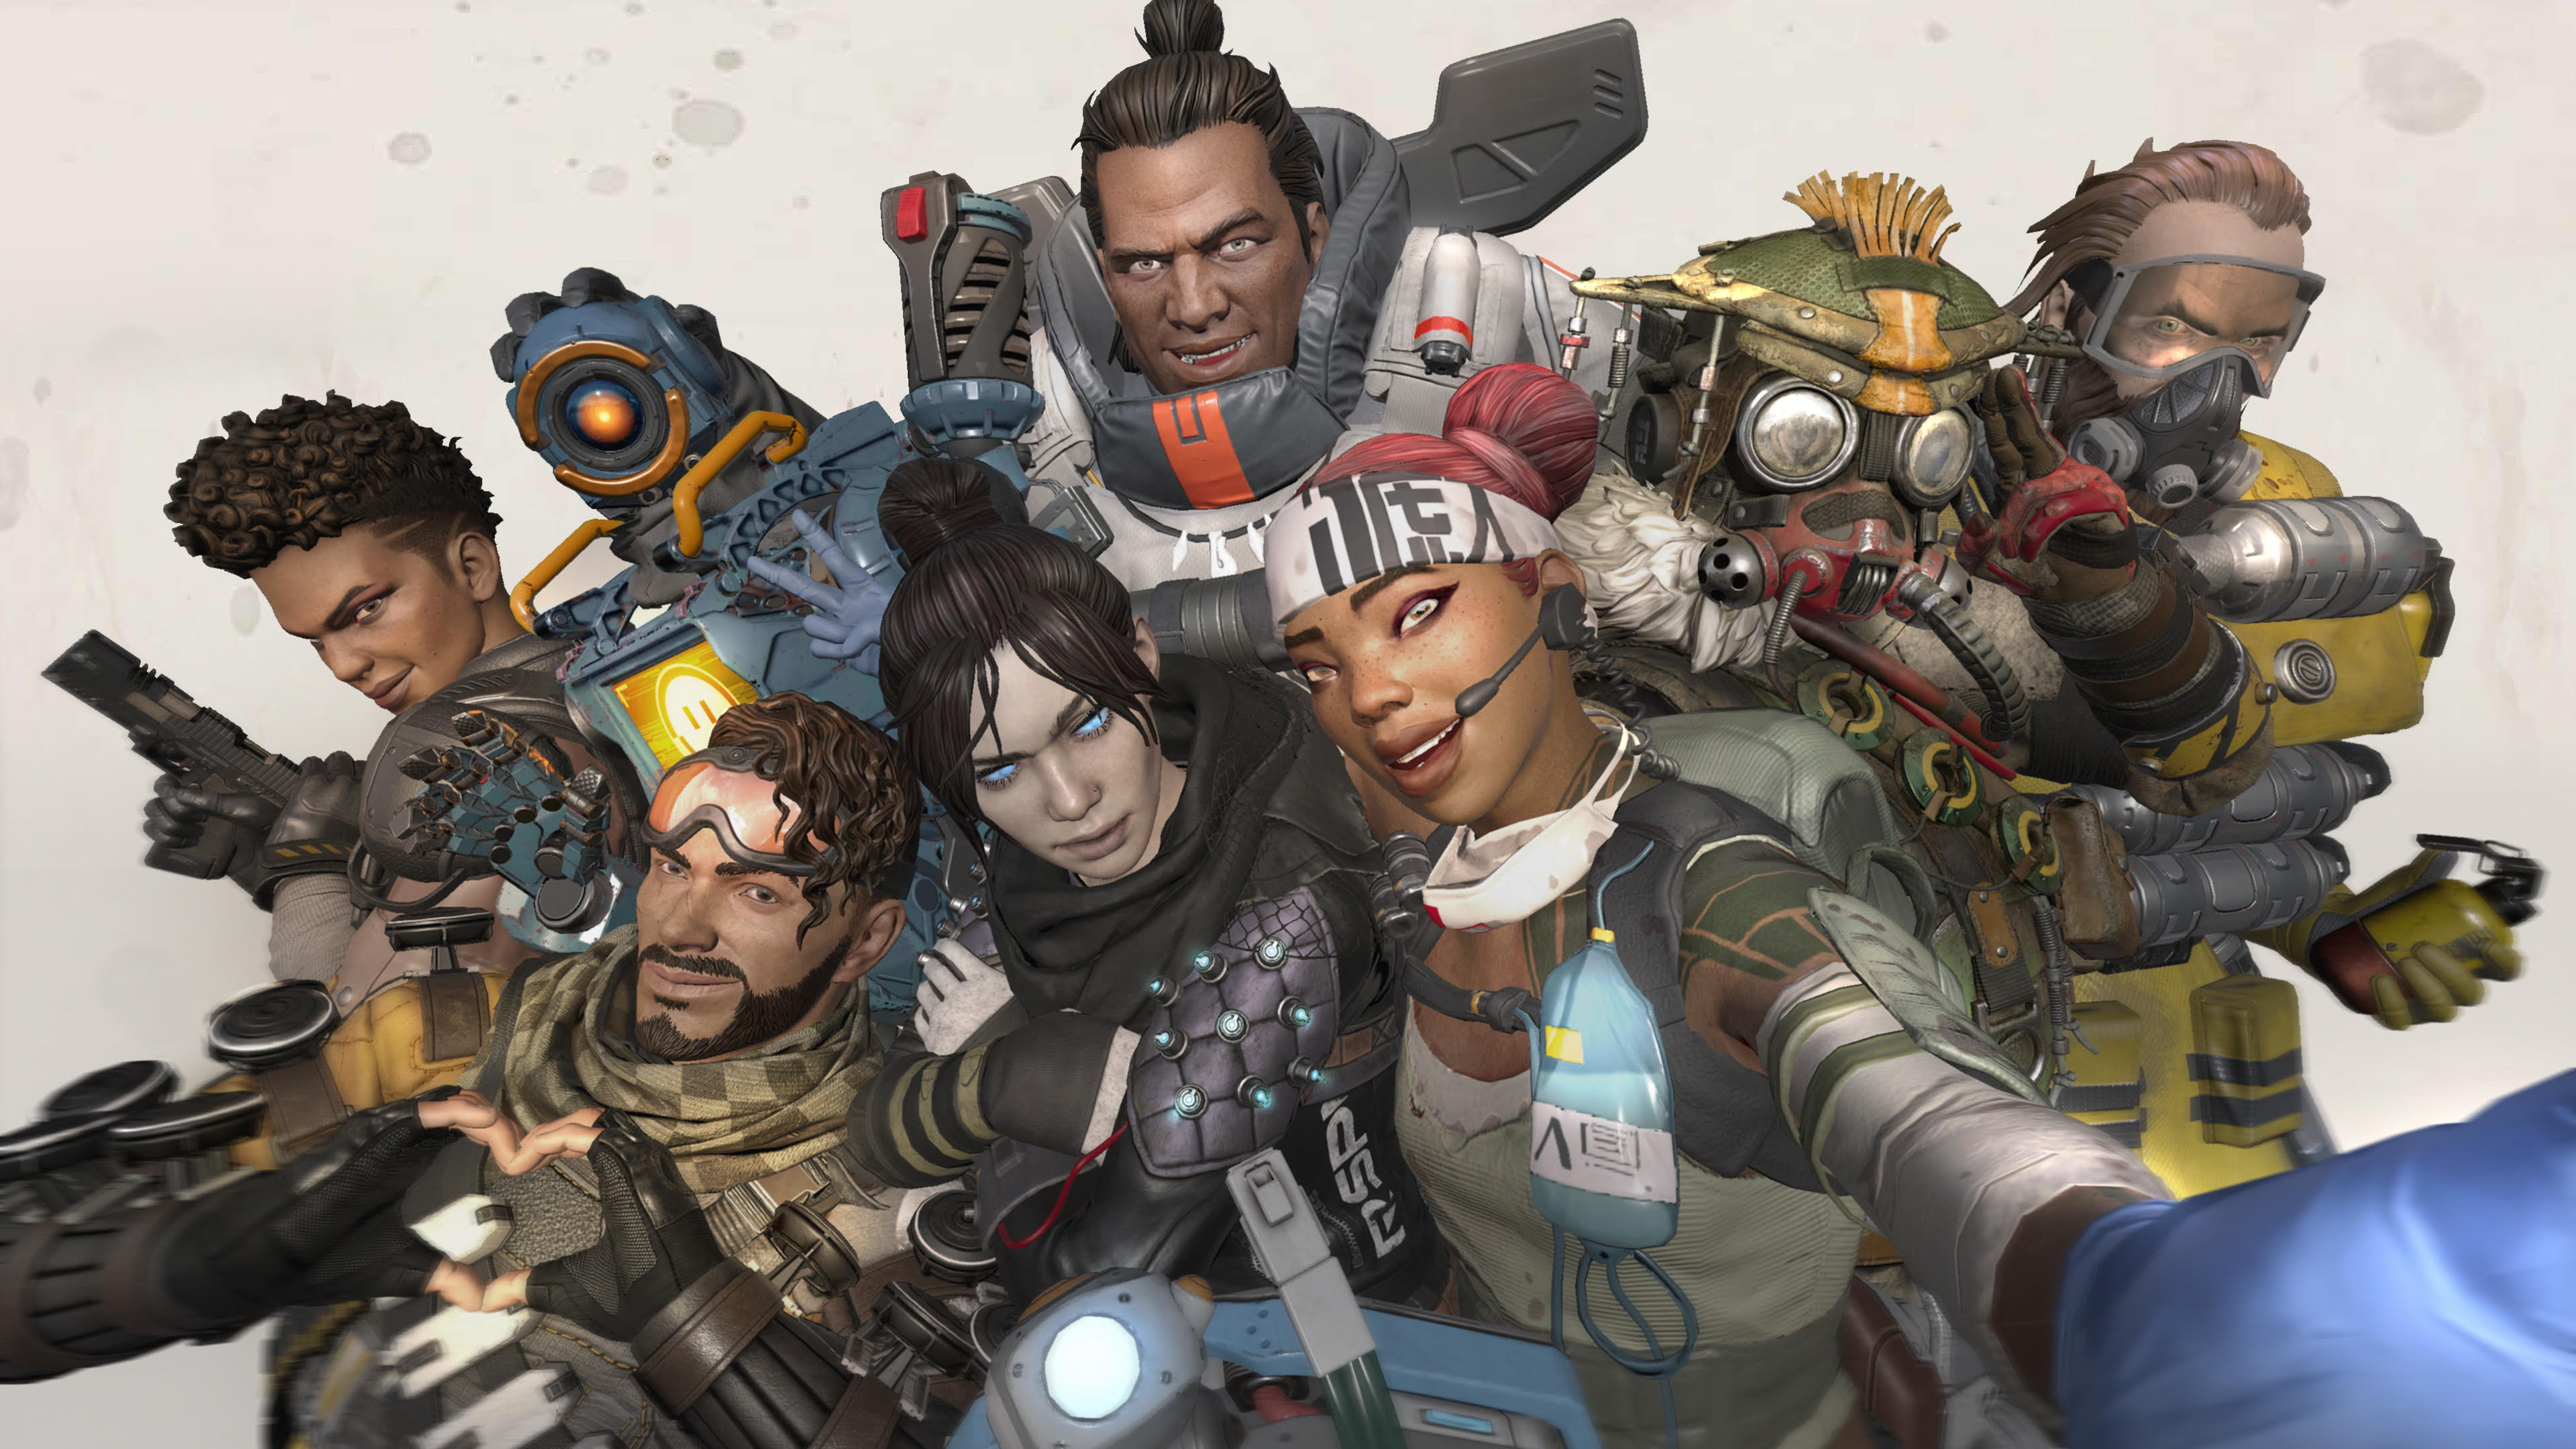 Respawn is developing a unique FPS for single player in the world of Apex Legends